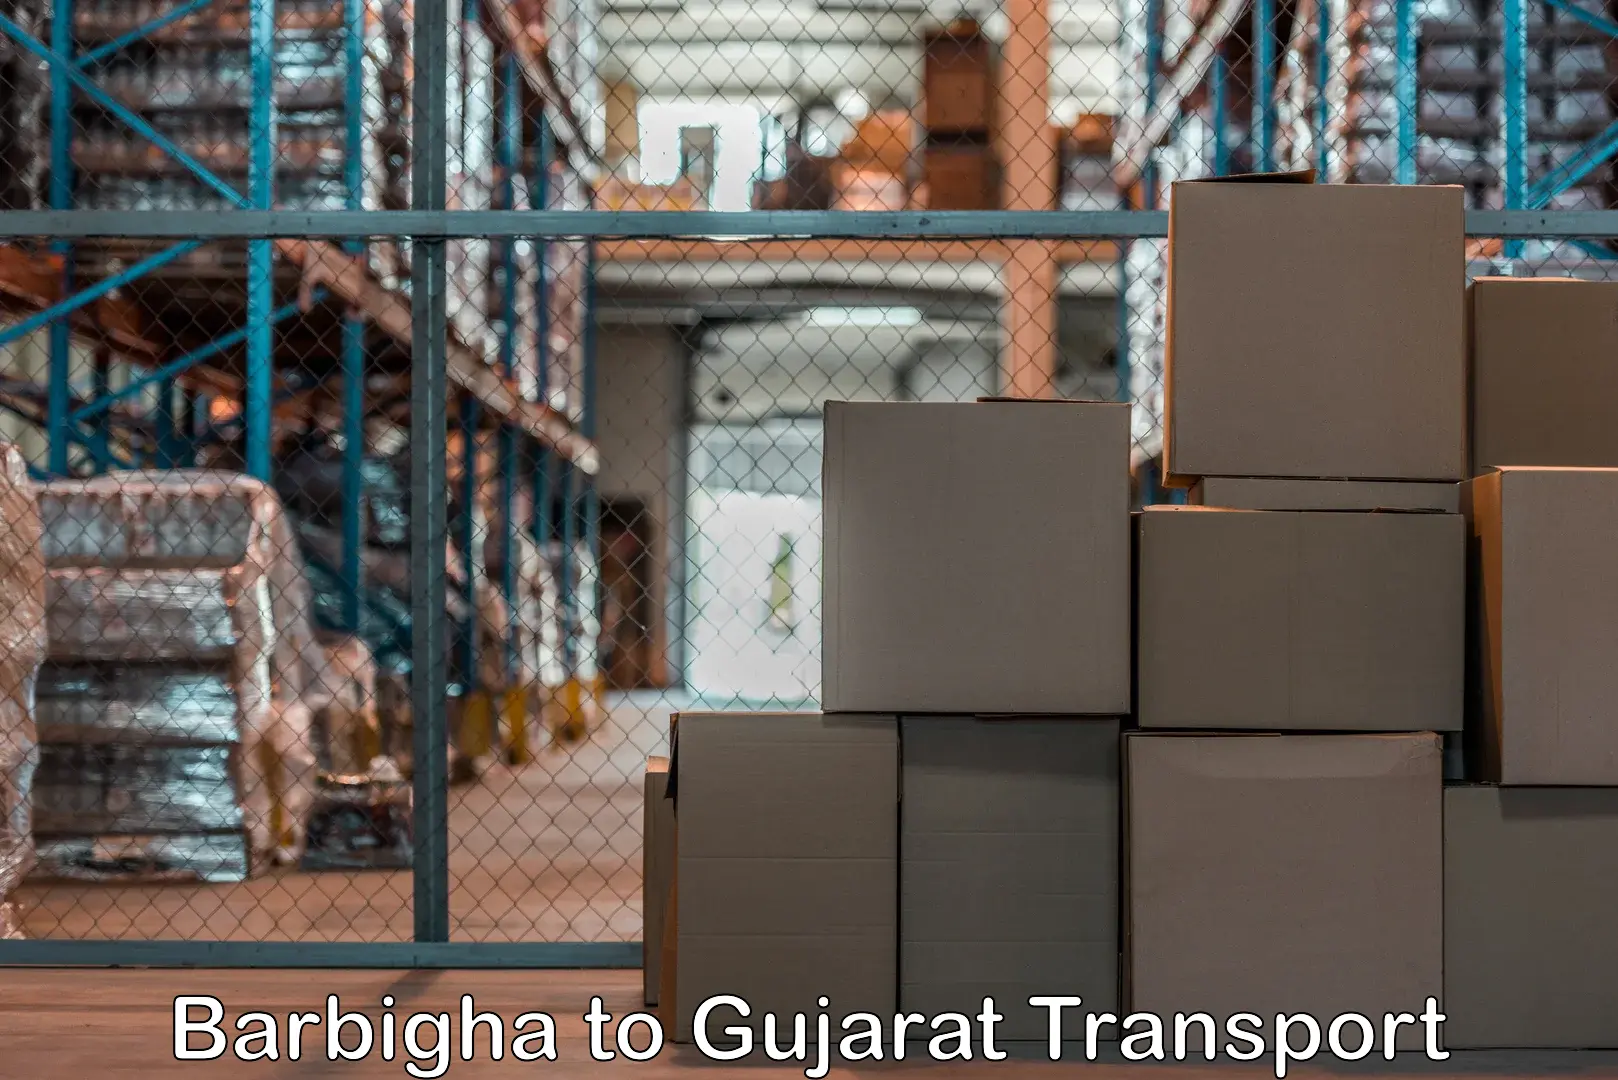 Transport in sharing in Barbigha to Bhuj